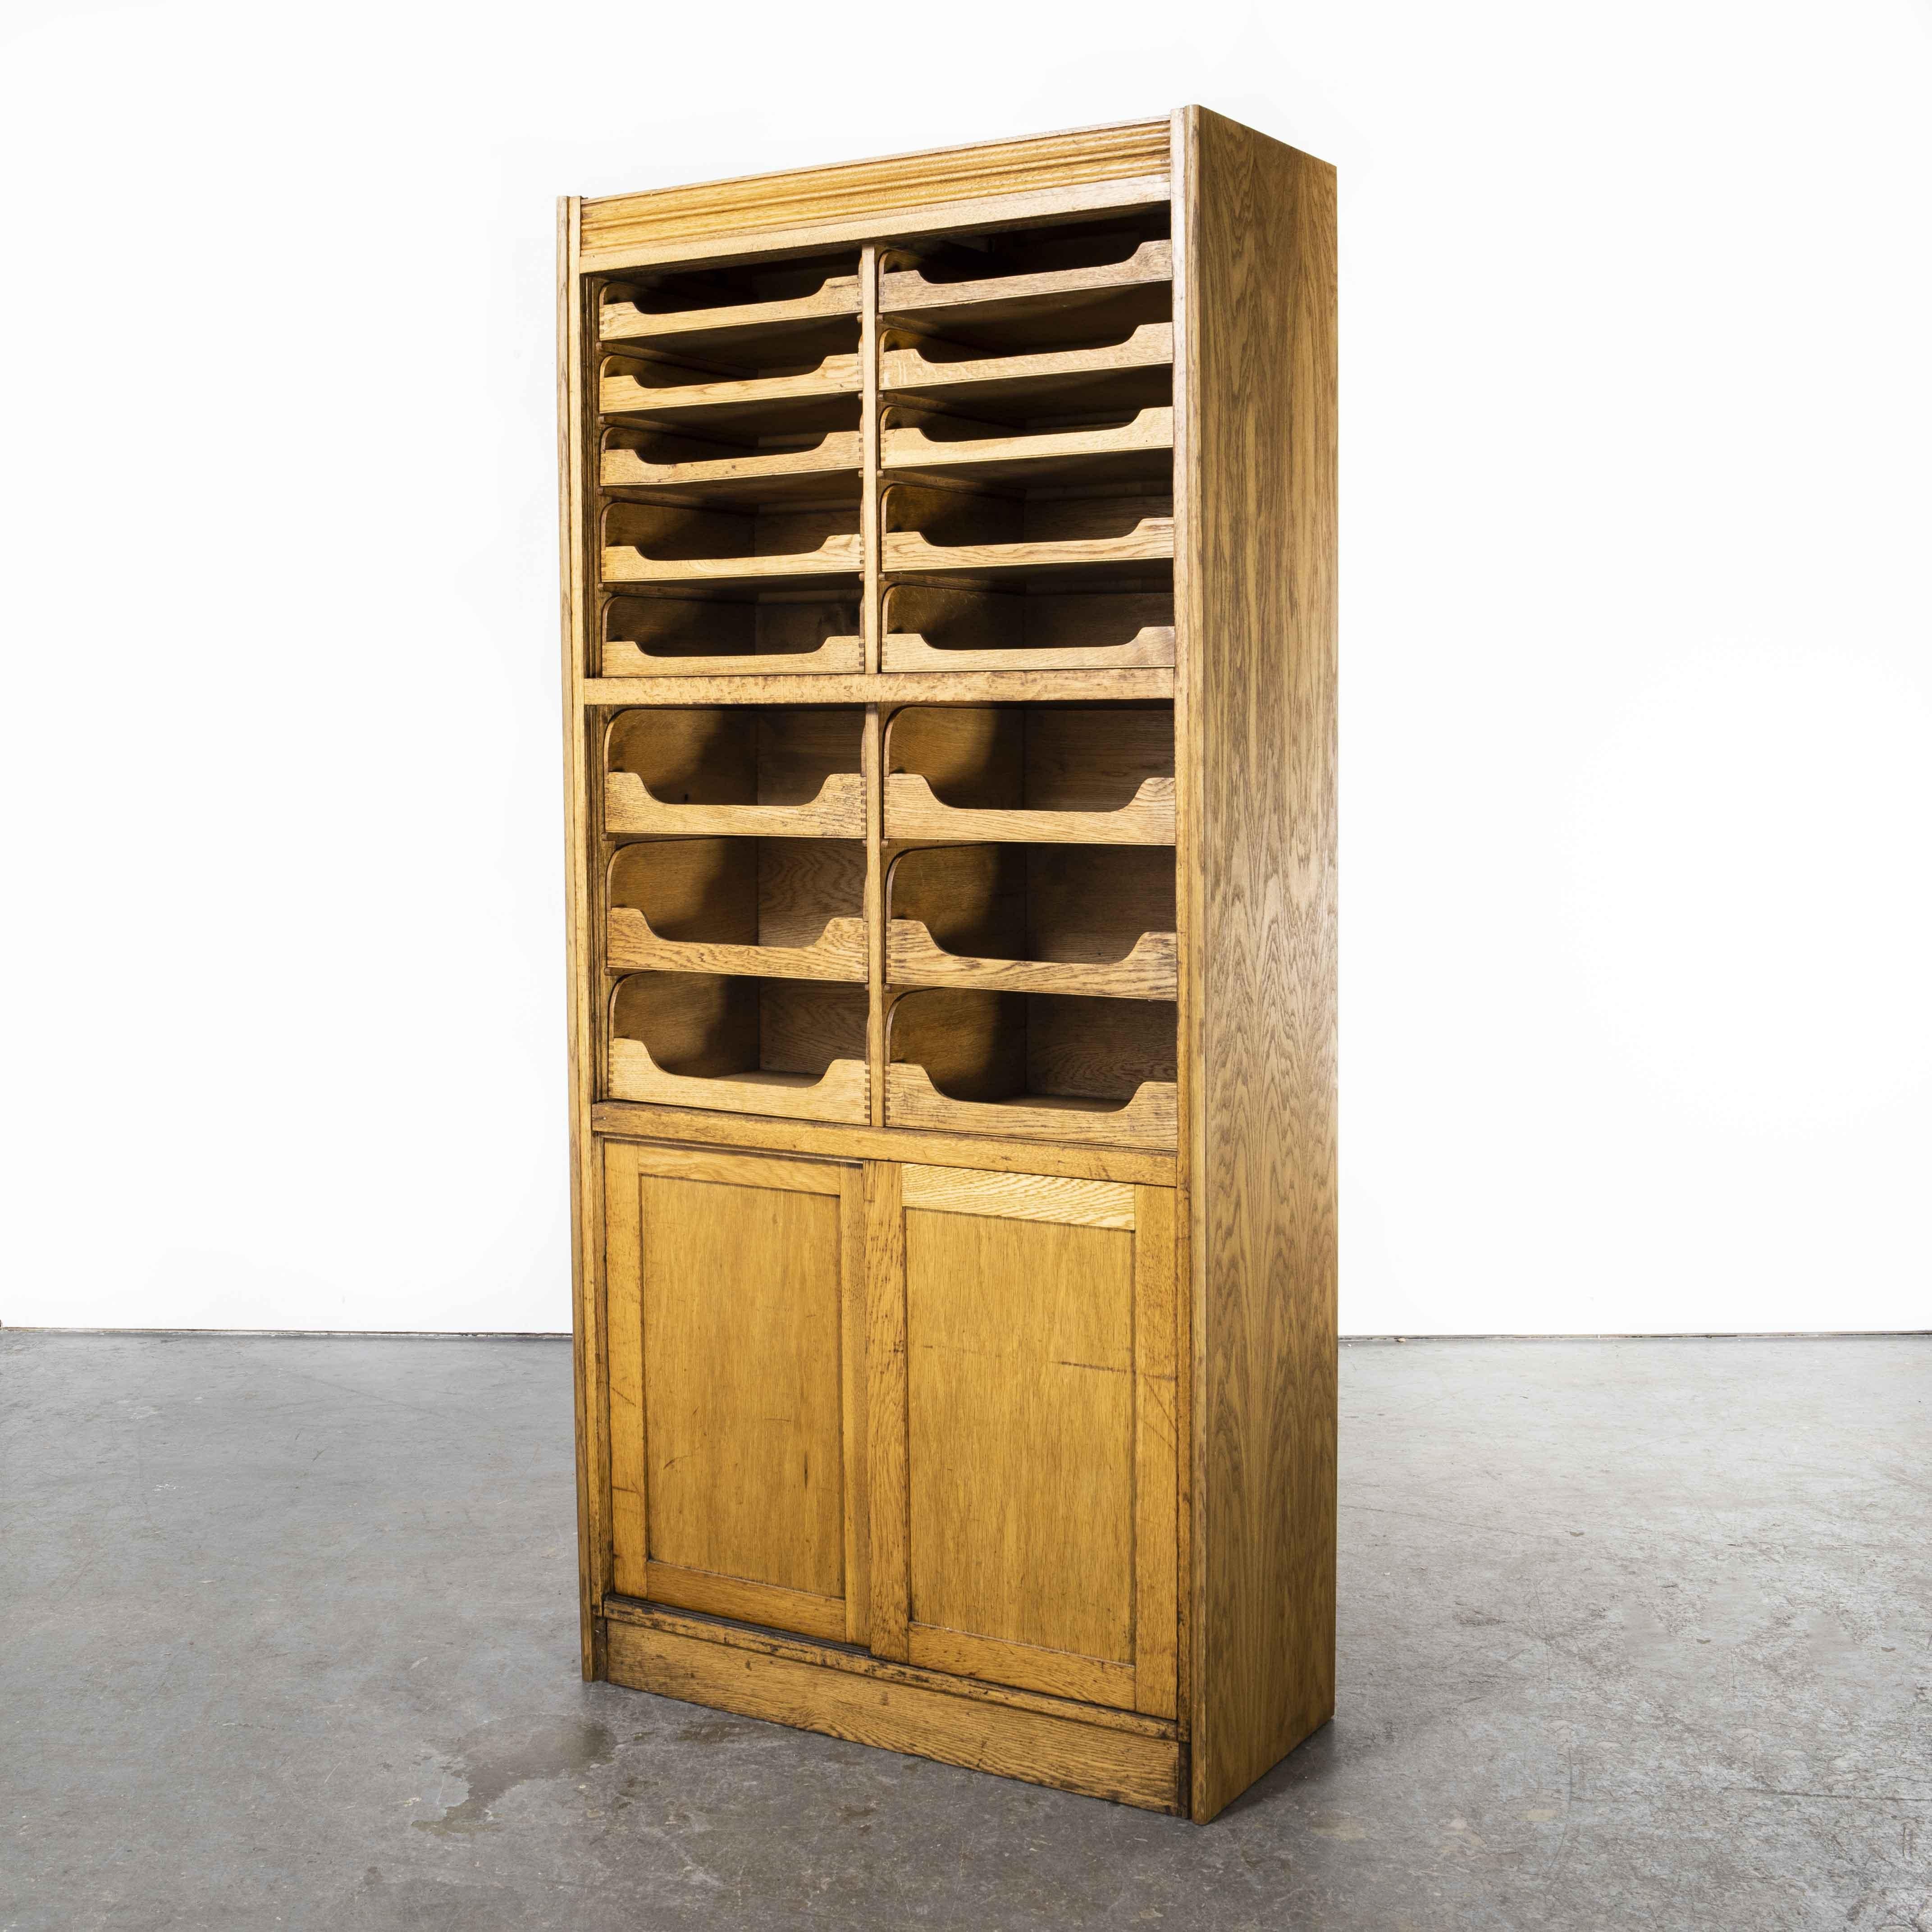 1950’s Tall English Haberdashery Shelved cabinet – Sixteen drawers (Model 1244.1)
1950’s Tall English Haberdashery Shelved cabinet – Sixteen drawers. An early 1950’s tall haberdashery/tailors shop display cabinet. Beautifully made in oak by a